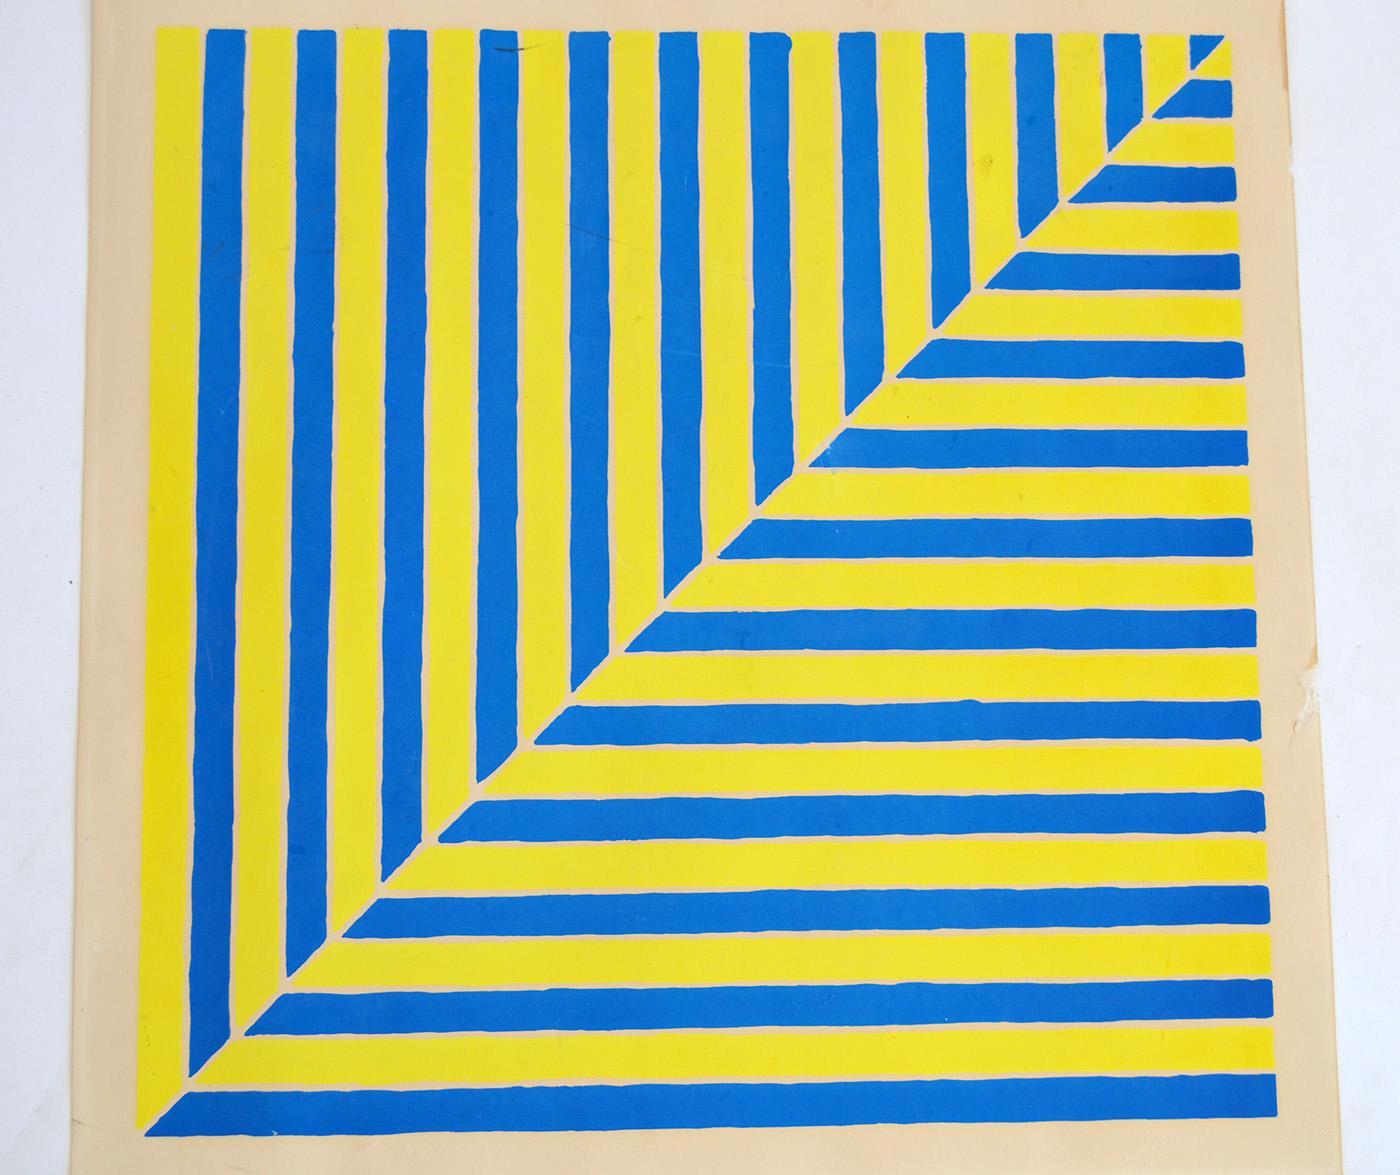 Frank Stella (1936-2024) “Rabat” Abstract Screenprint Unframed Edition 

Frank Stella’s “Rabat” Screenprint (1964) is a mid century abstract geometric composition. Created on wove paper with blindprint, this piece - from an edition of 500 - is being